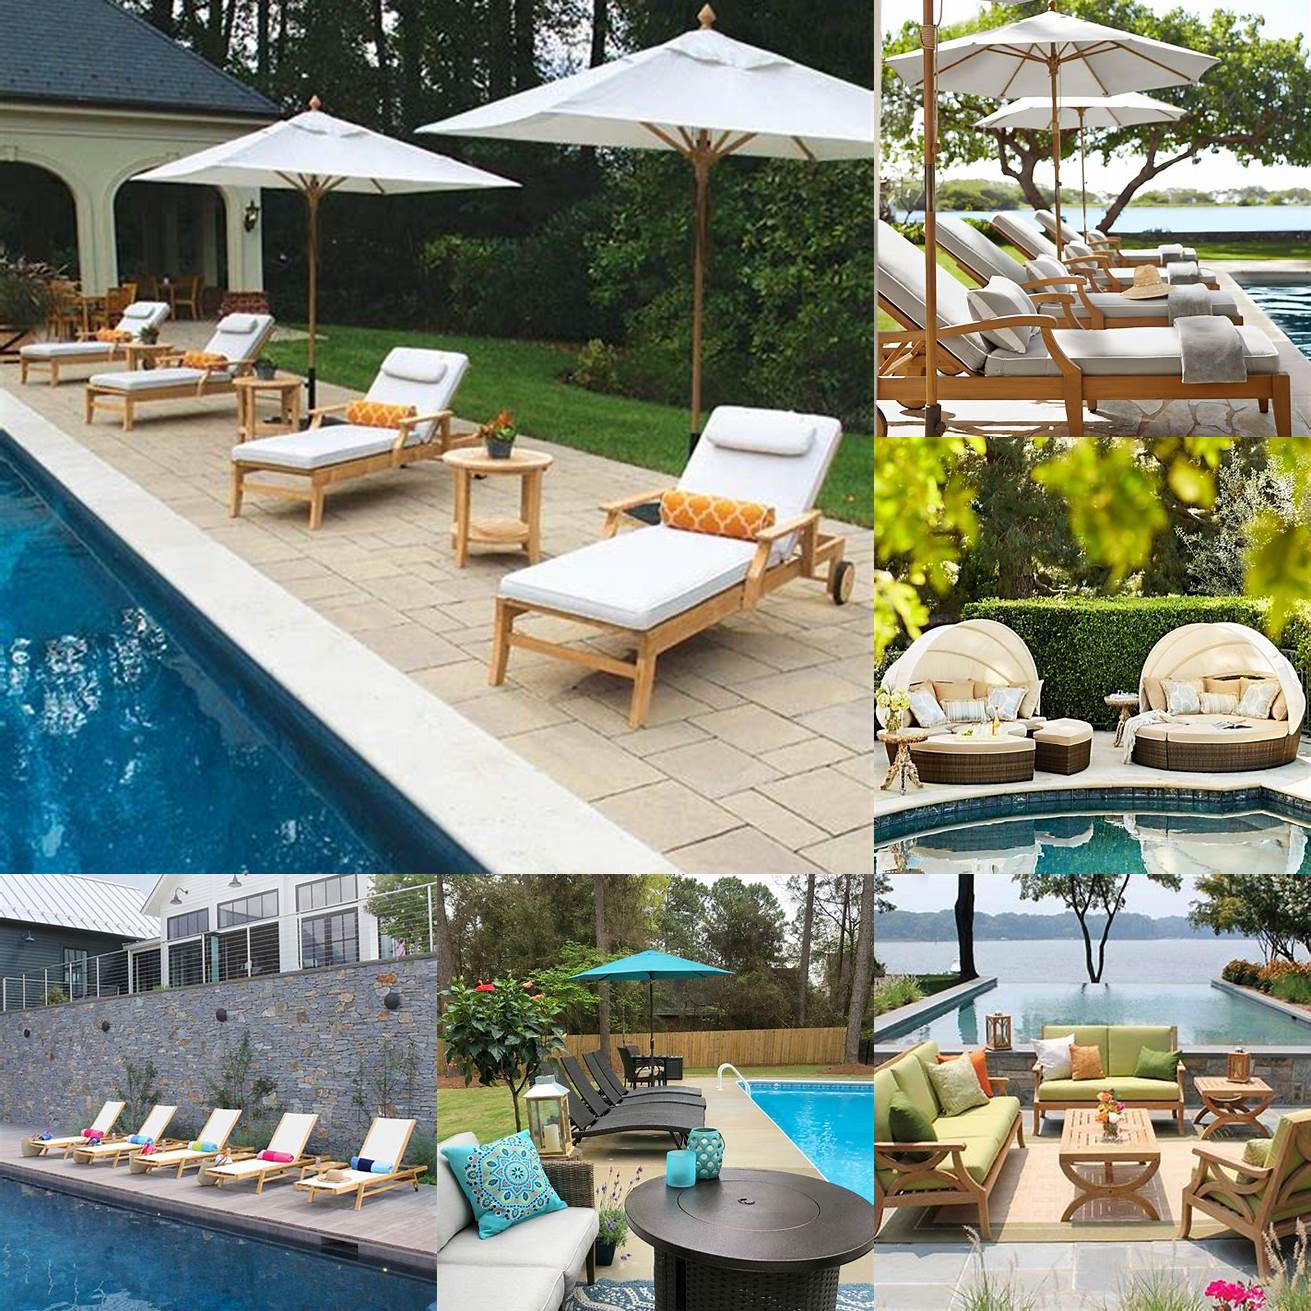 Country Casual Teak Furniture in a pool area